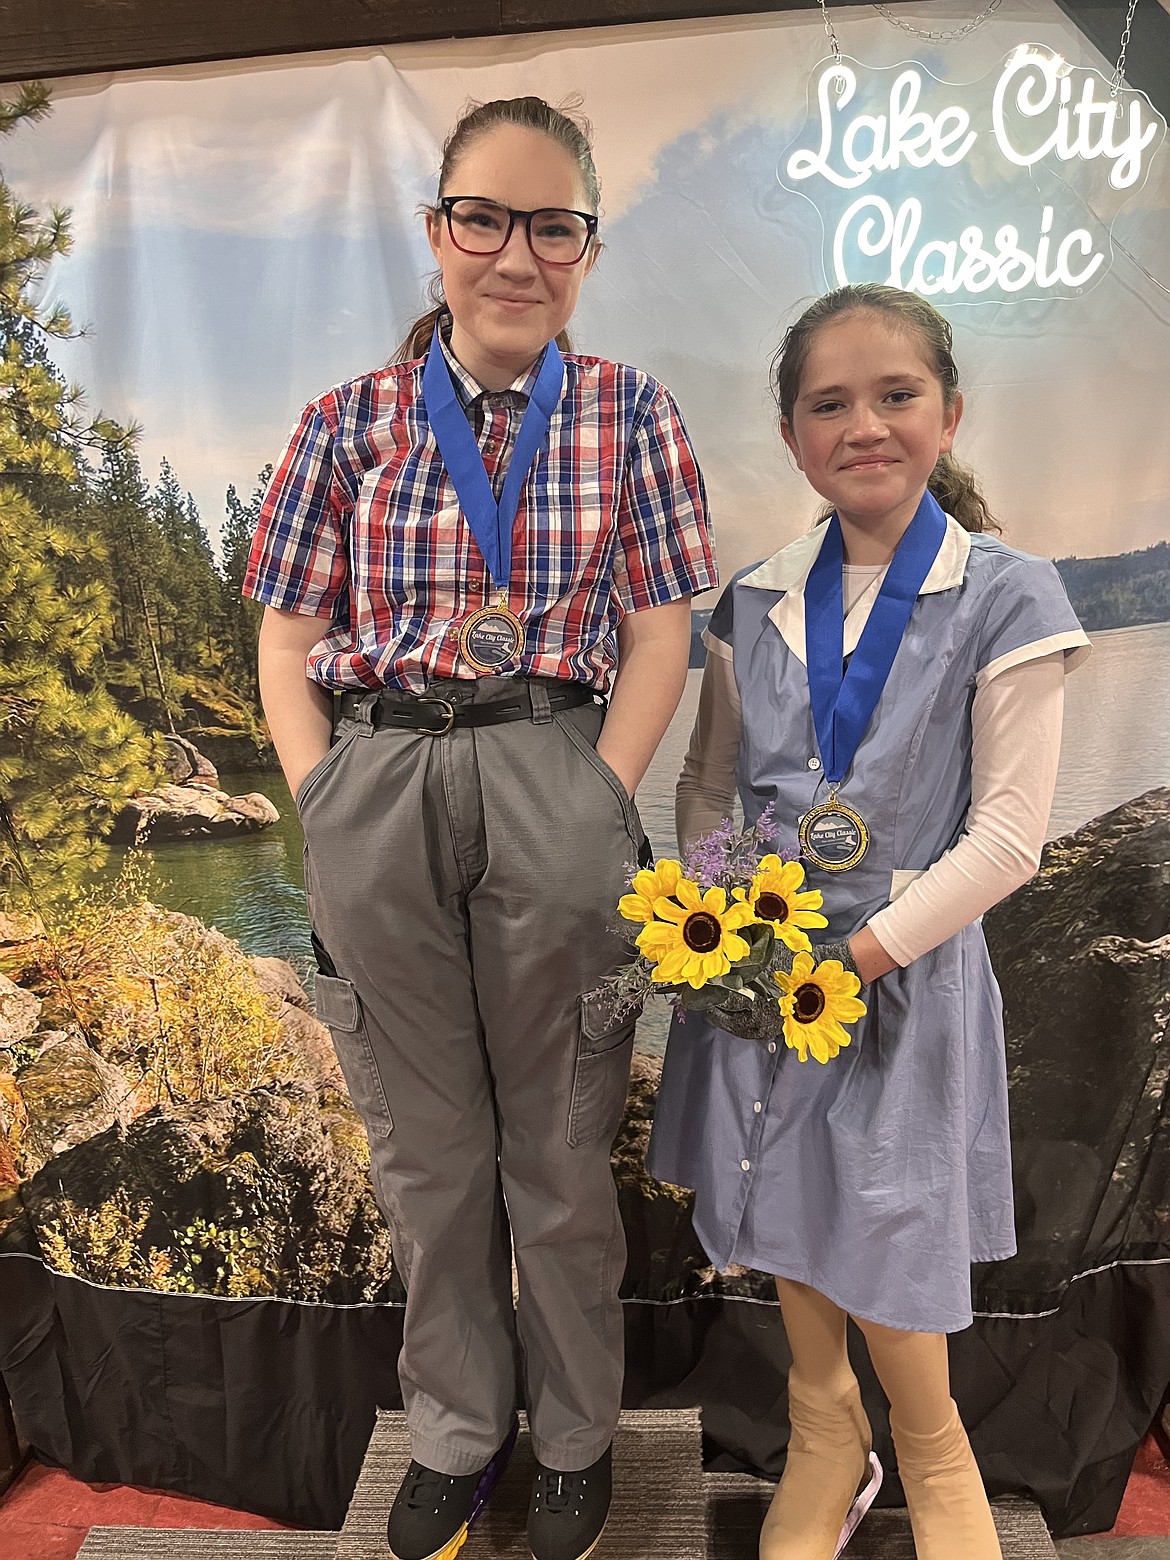 Courtesy photo 
Harley Kaiser, left, and Ella Perry, part of the Lake City Figure Skating program of the Spokane Figure Skating Club, which hosted the Lake City Classic on May 17-19 at the Frontier Ice Arena in Coeur d'Alene.